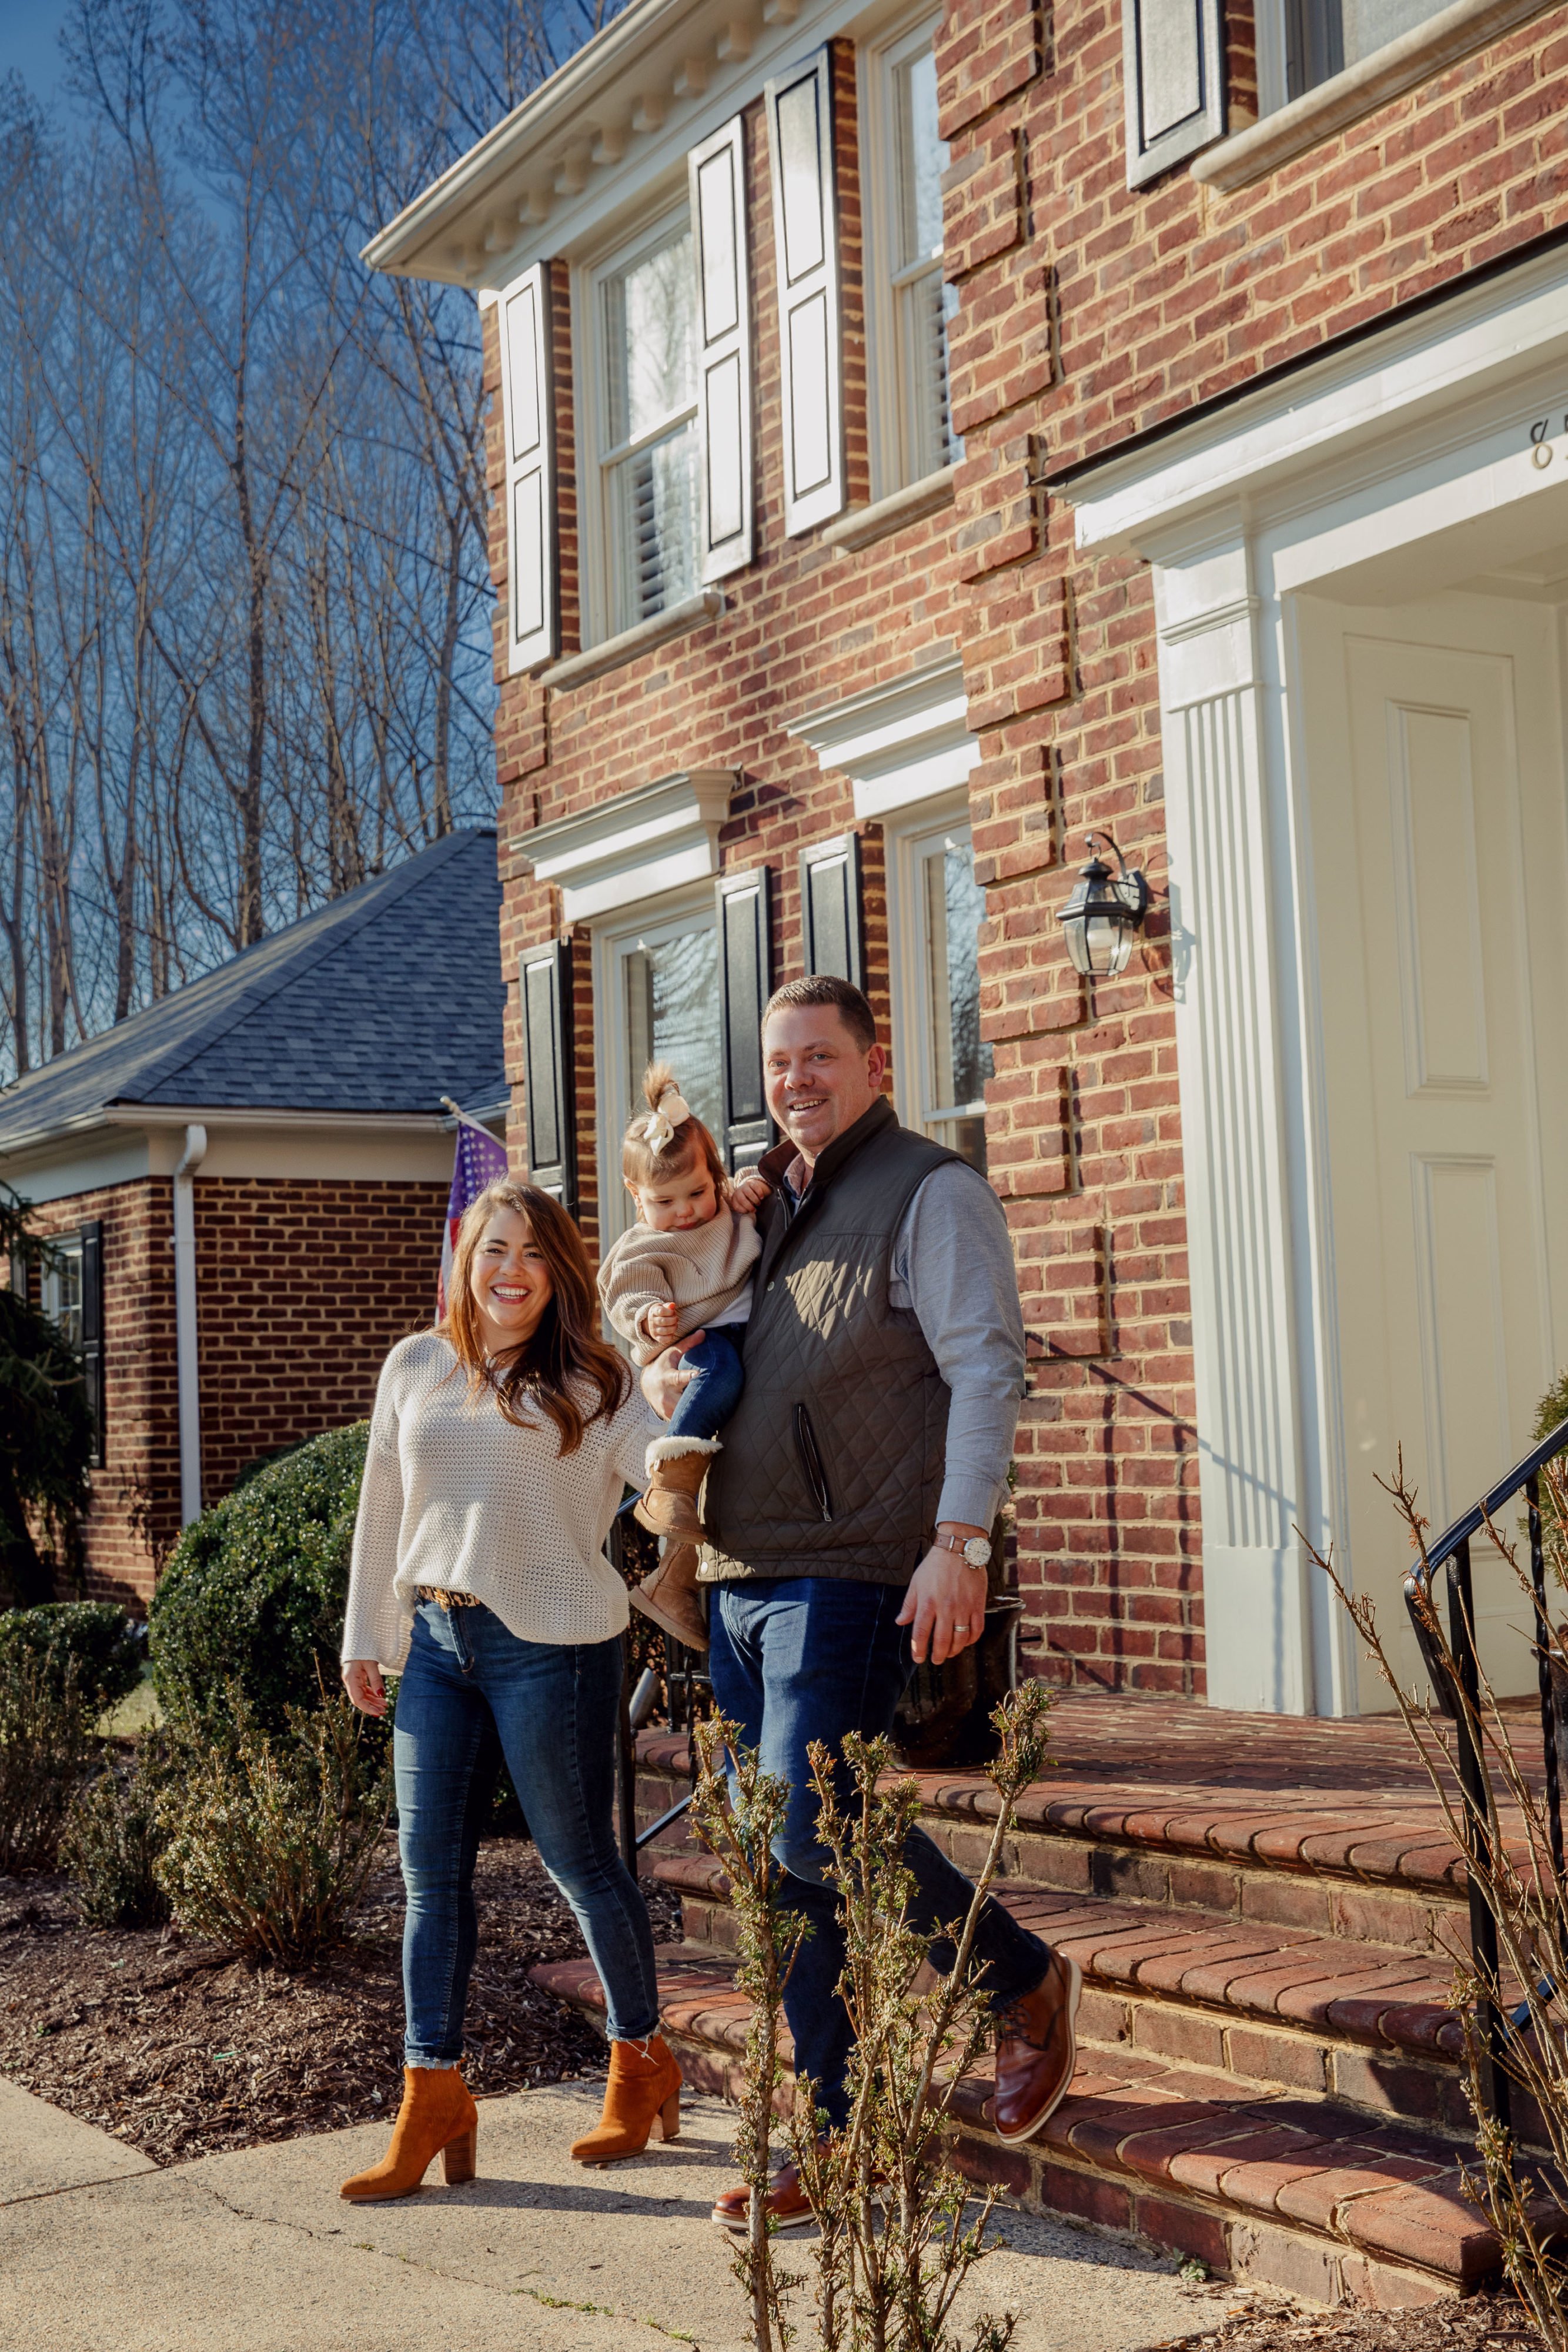 Brian and Kristen Frazier step outside with their 16 month old daughter, Olivia, and embrace in front of their new home in Great Falls, VA.